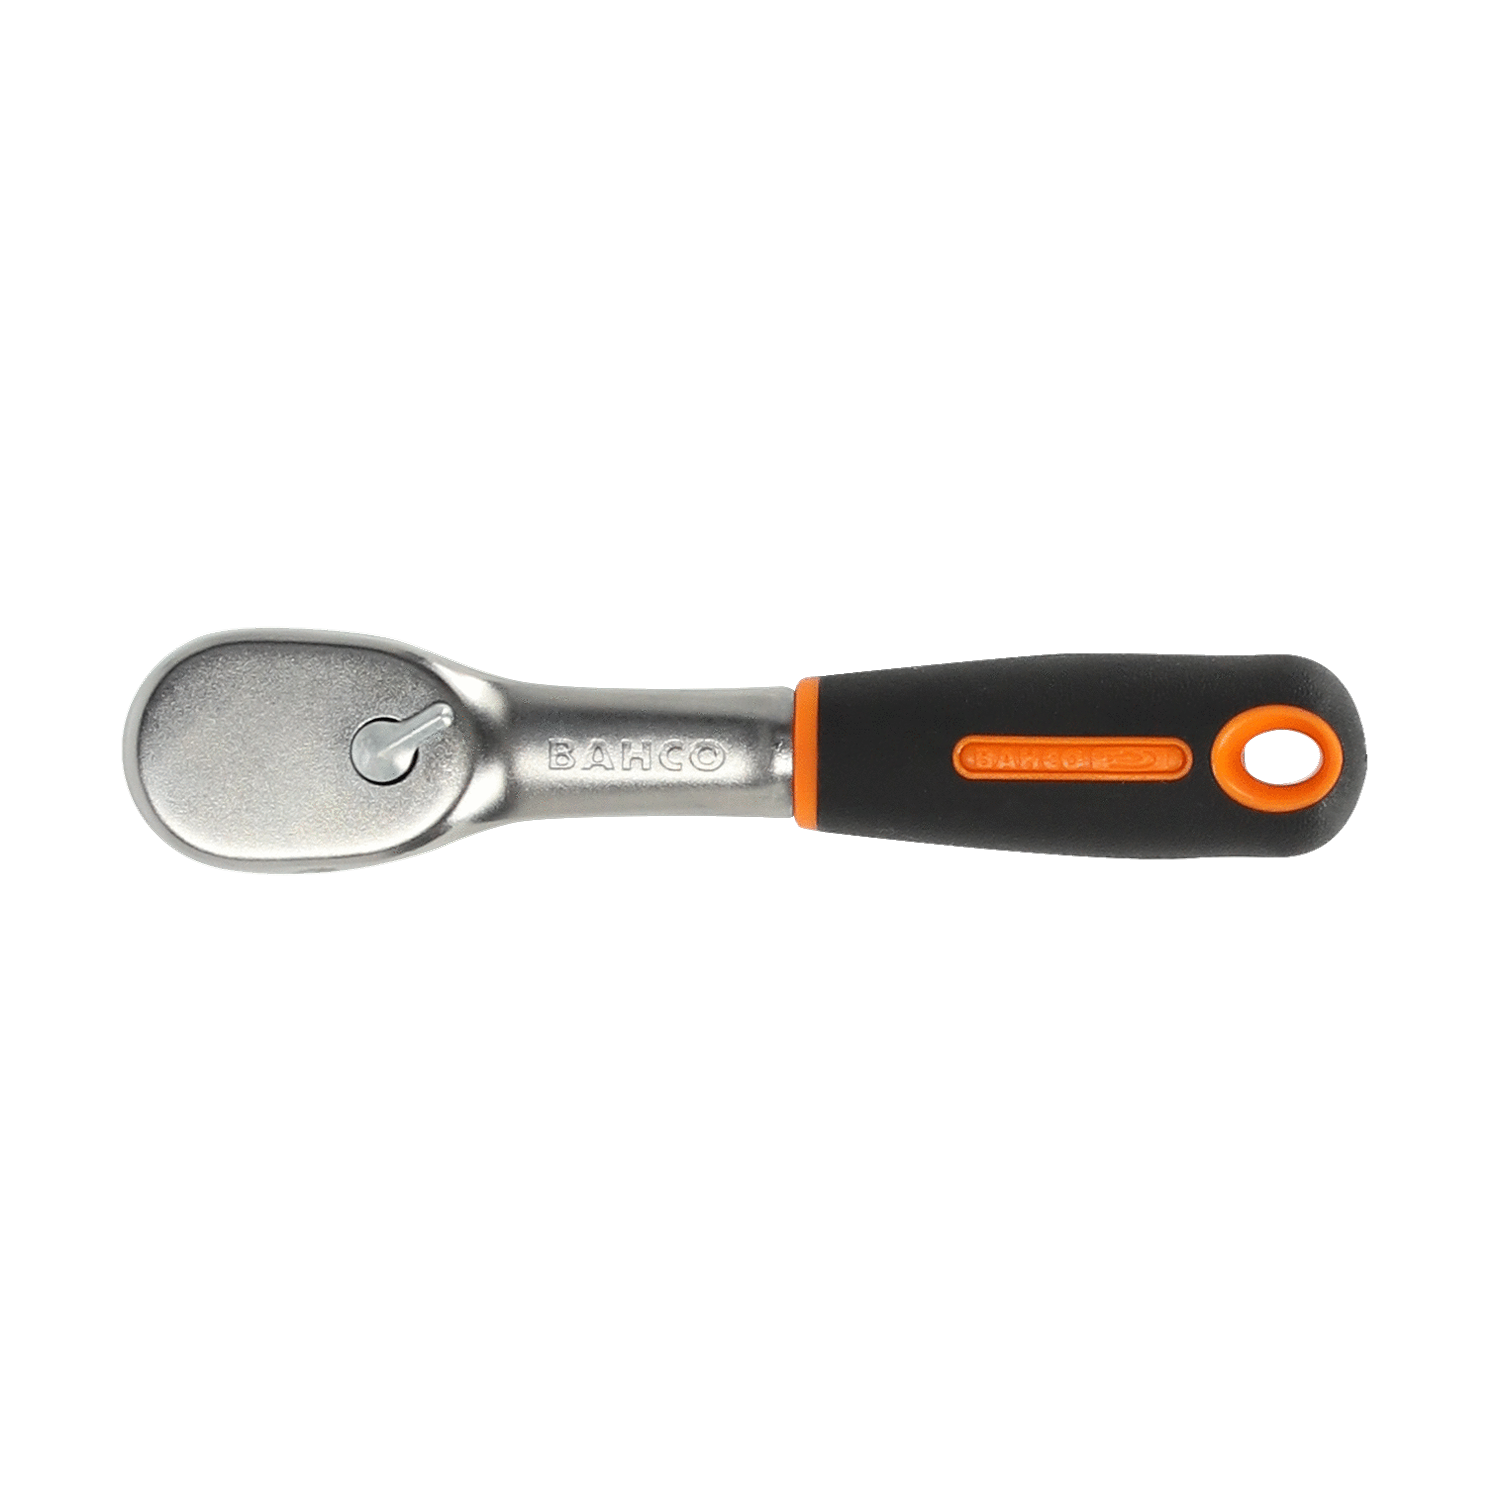 BAHCO 6950 1/4" Pear Head Reversible Ratchets with 72 teeth - Premium Reversible Ratchet from BAHCO - Shop now at Yew Aik.